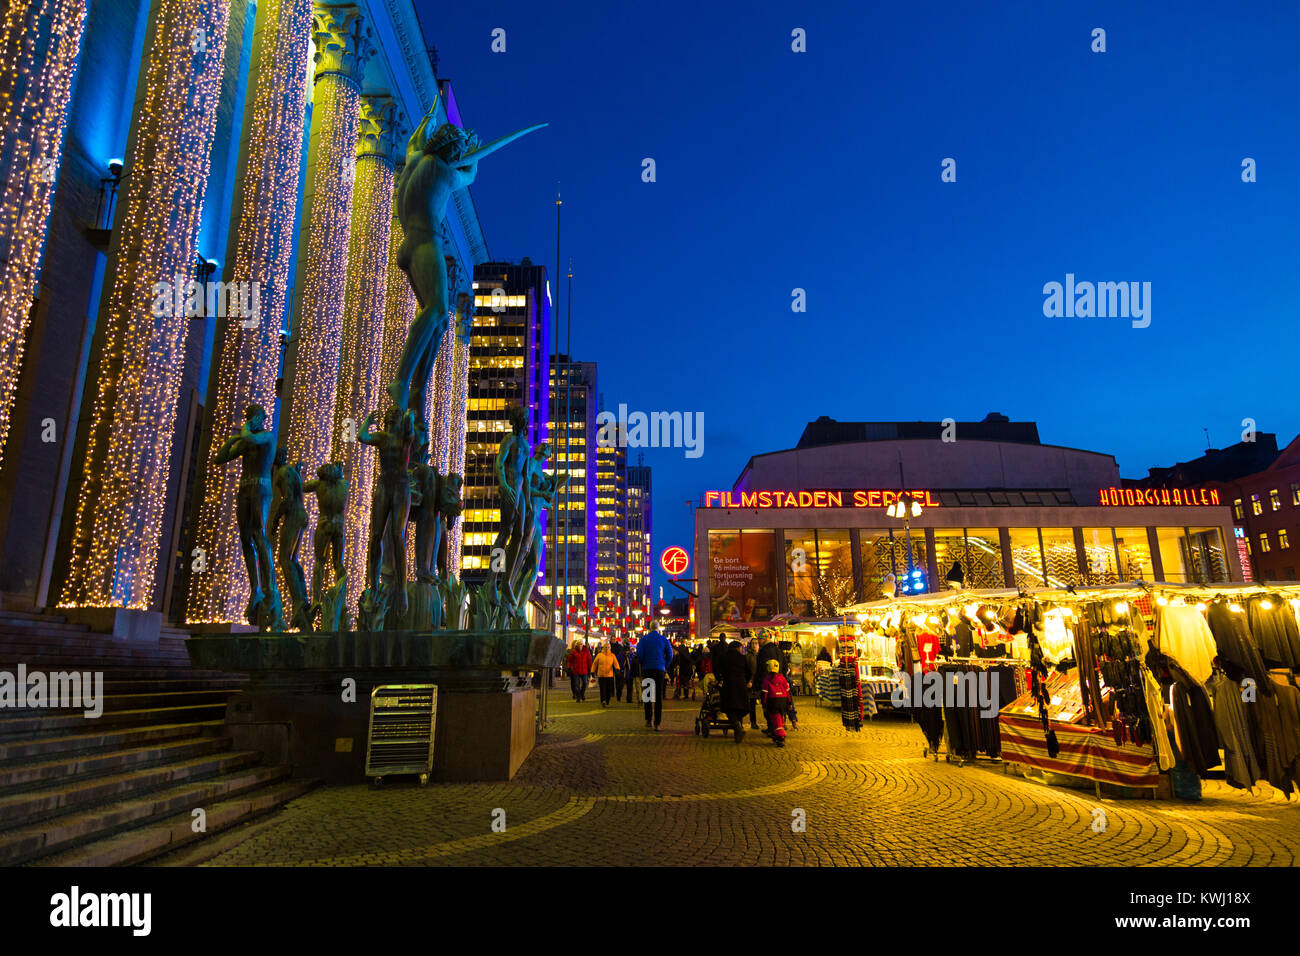 Konserthuset with Orpheus statue in front and Hotorget market lit up for Christmas at night, Stockholm, Sweden Stock Photo